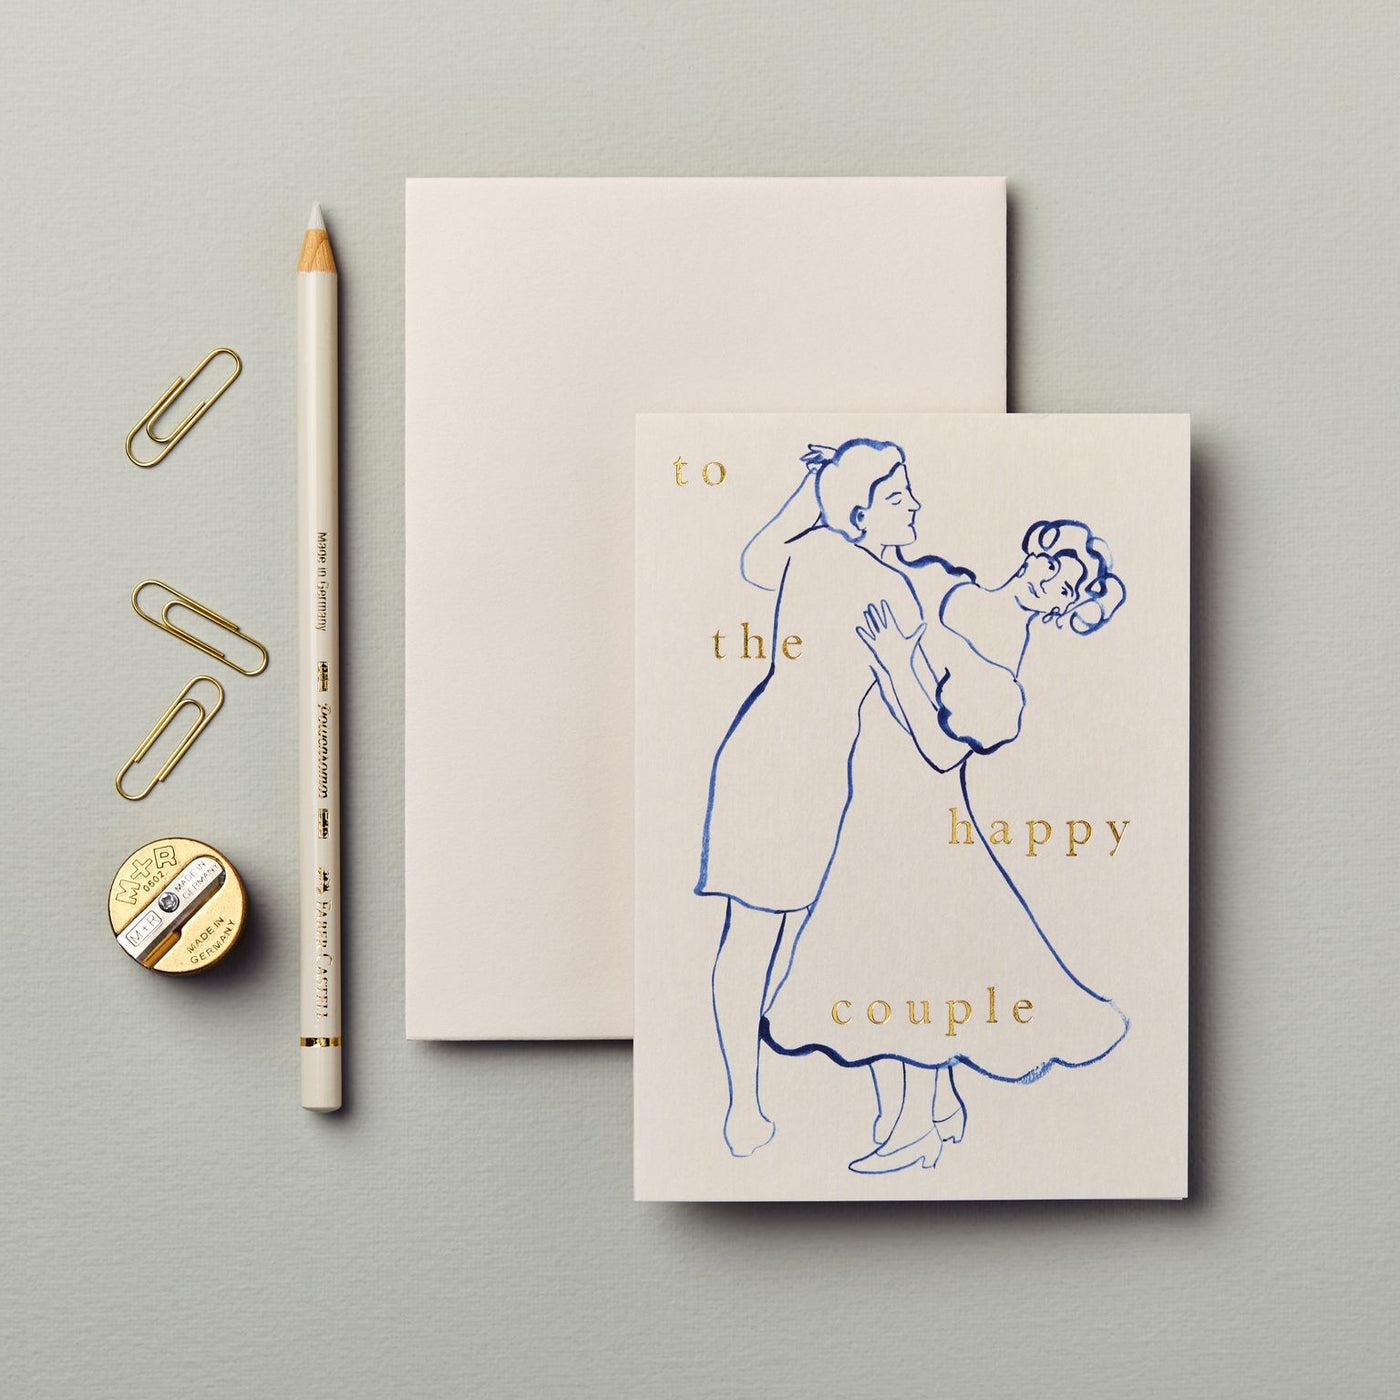 Happy Couple Dancers Greetings Card